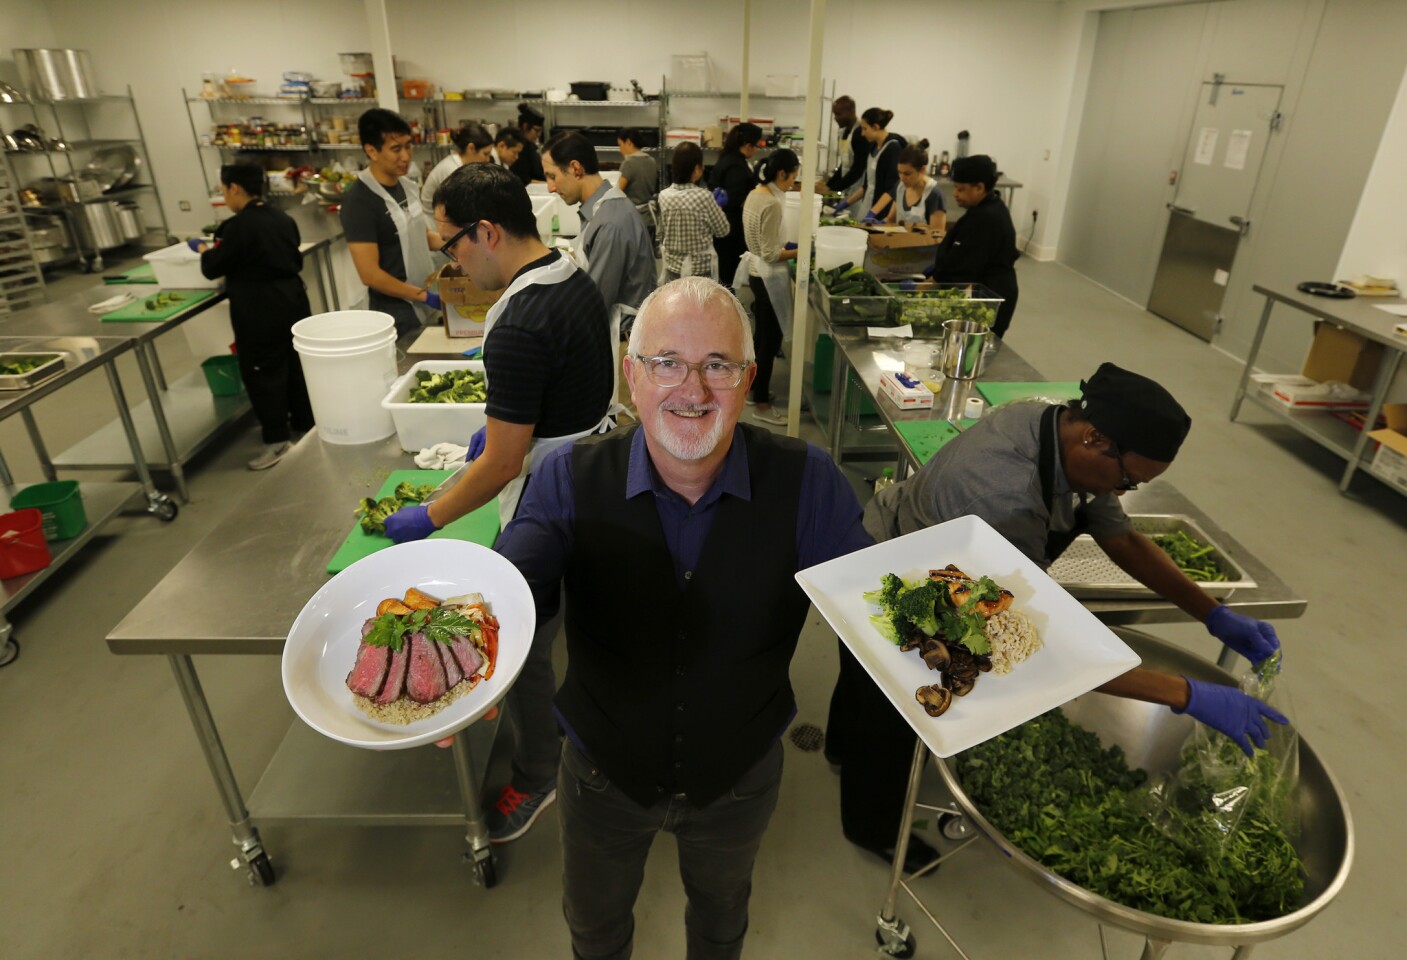 L.A. Kitchen founder Robert Egger holds meals made for the elderly by the workers, students and volunteers behind him. A major aim of the program is to provide job training to former inmates and young adults leaving the foster care system.